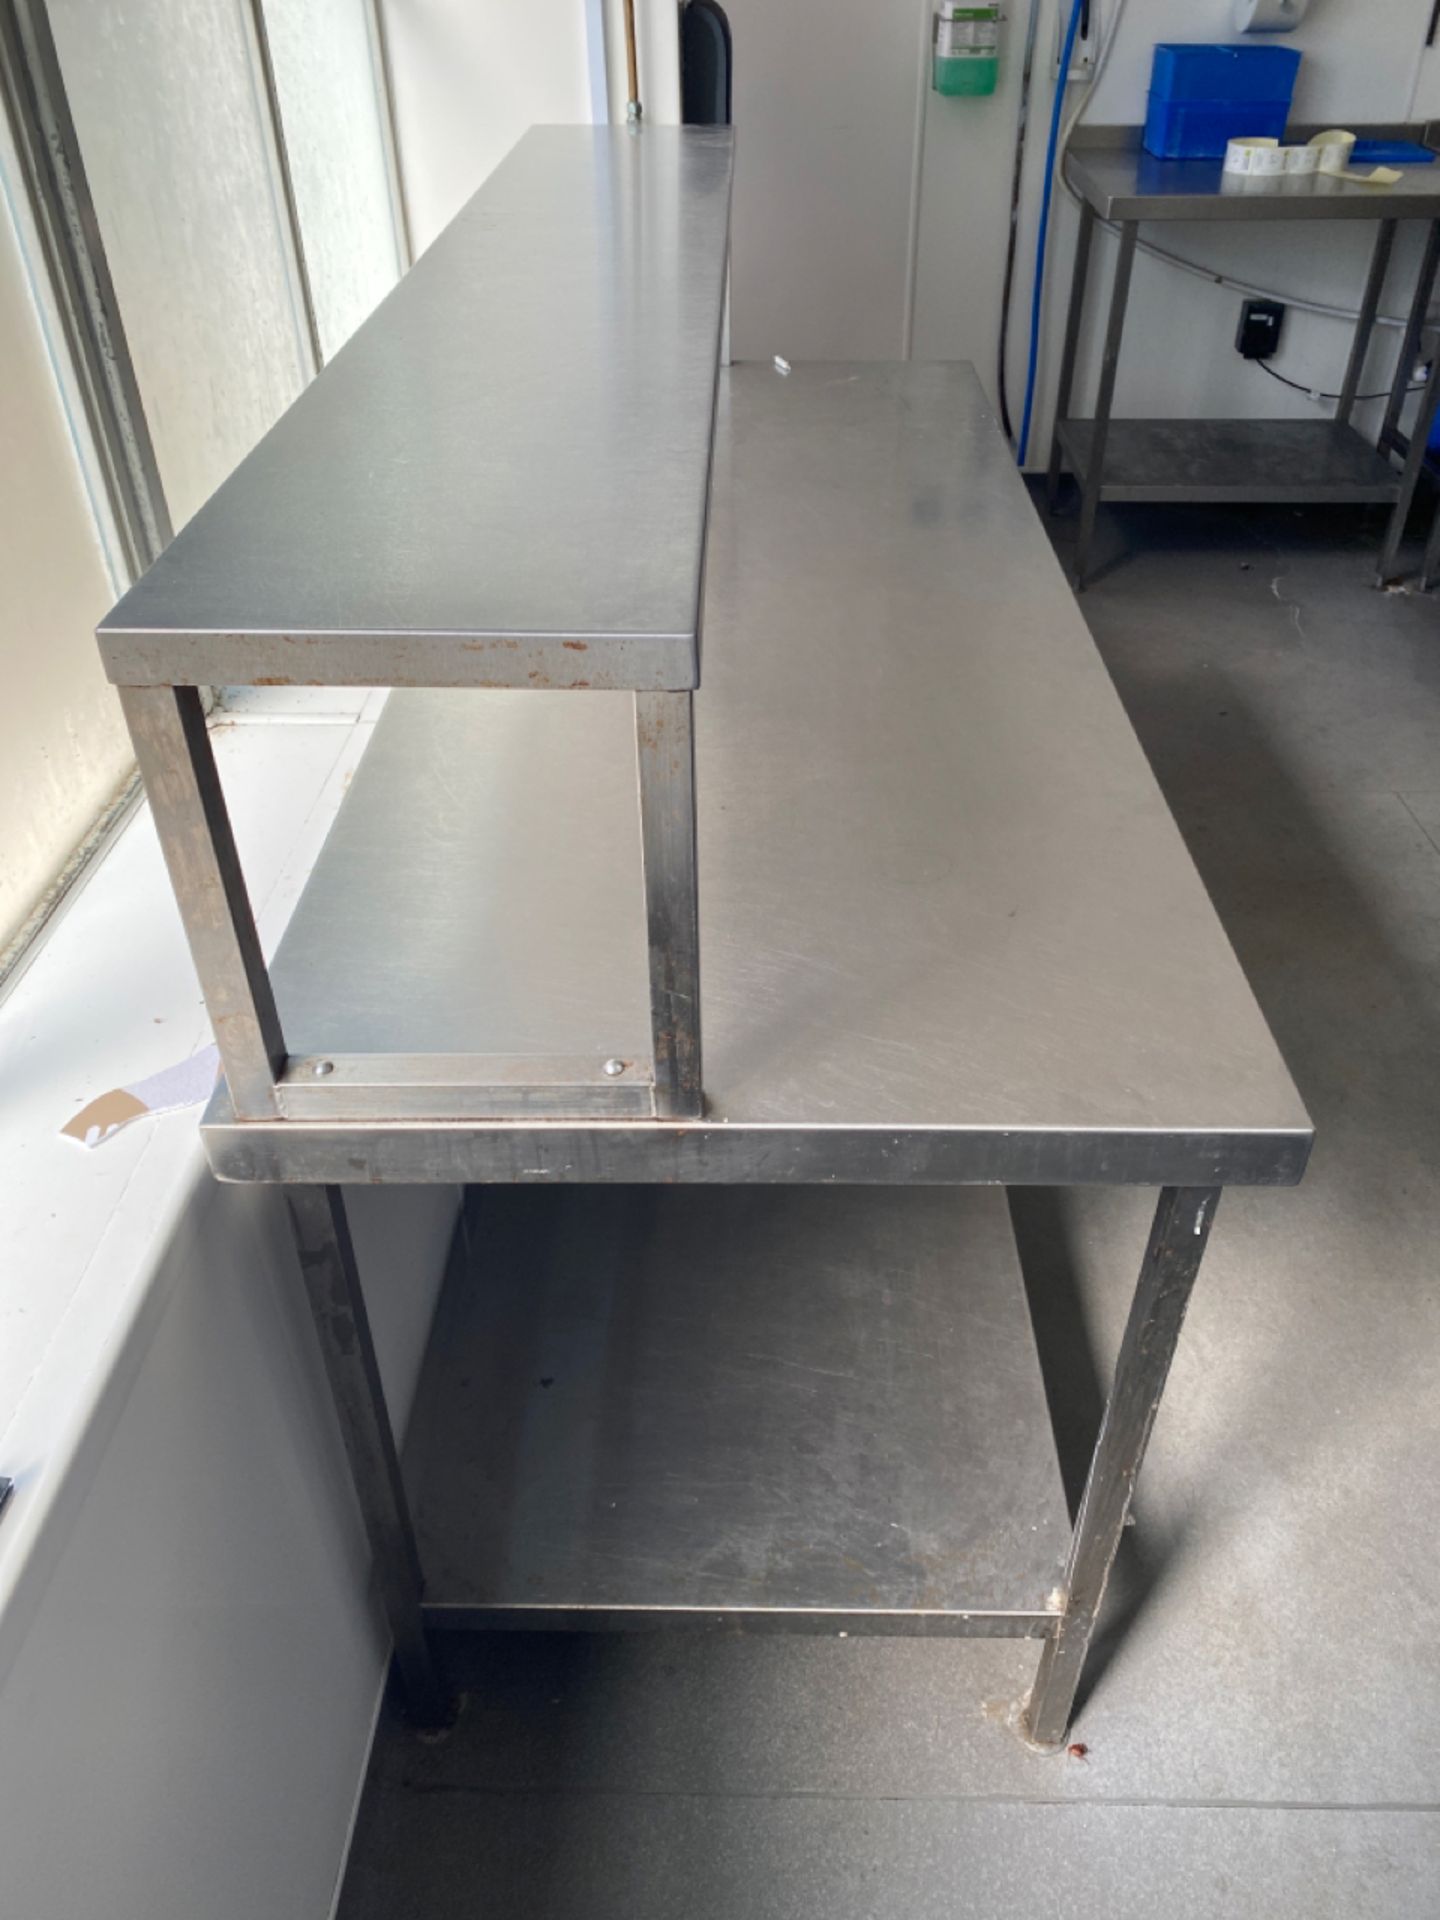 Stainless Steel Preparation Unit - Image 4 of 4